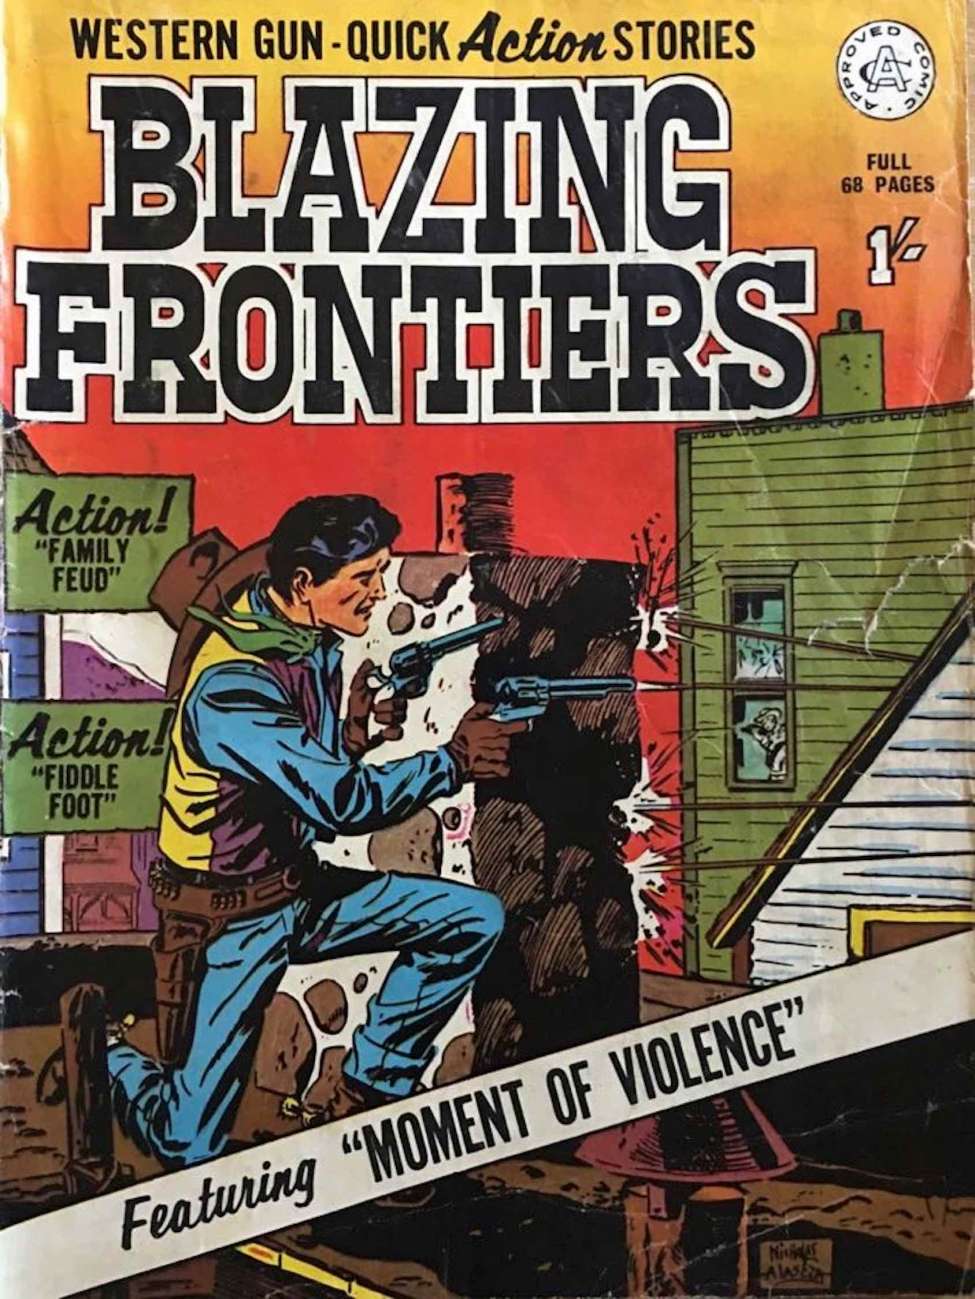 Book Cover For Blazing Frontiers nn